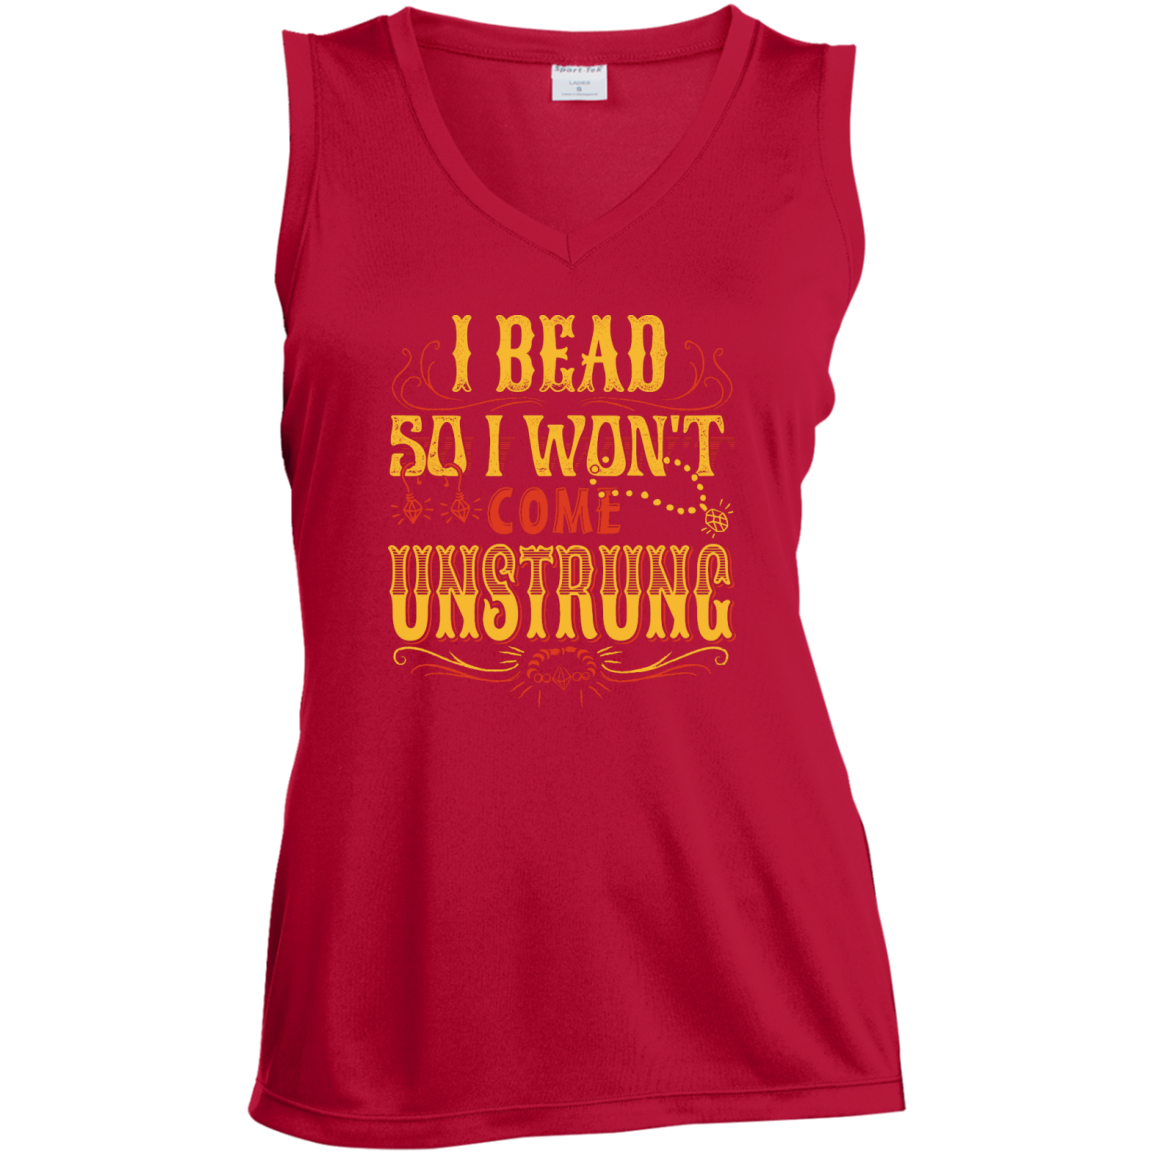 I Bead So I Won't Come Unstrung (gold) Ladies Sleeveless V-neck - Crafter4Life - 3